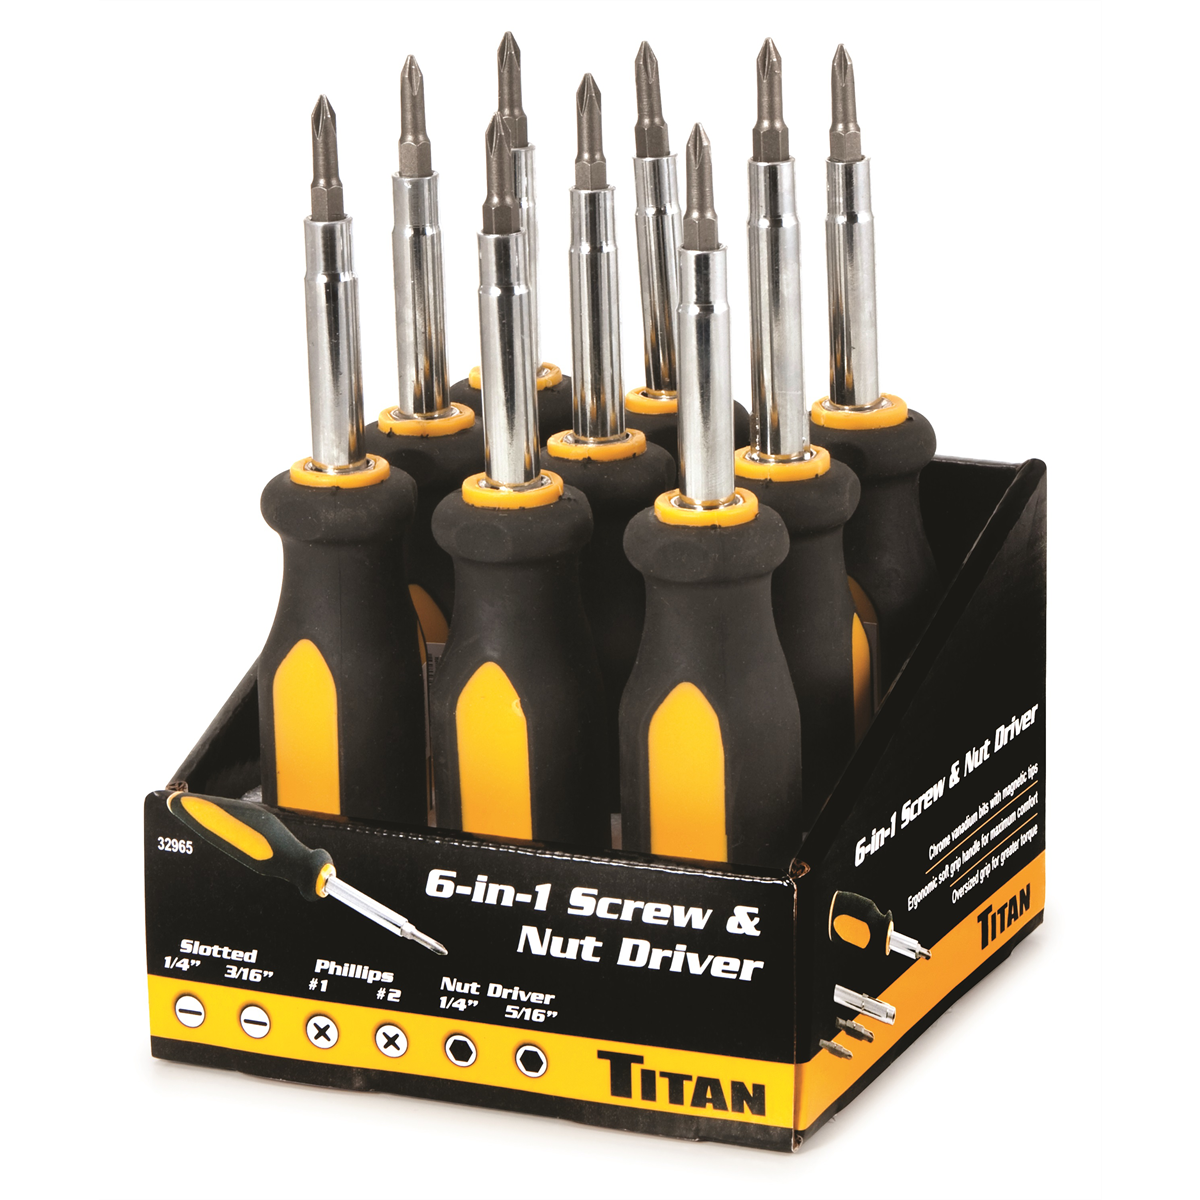 6-in-1 Screwdriver 9 Pc. Counter Display